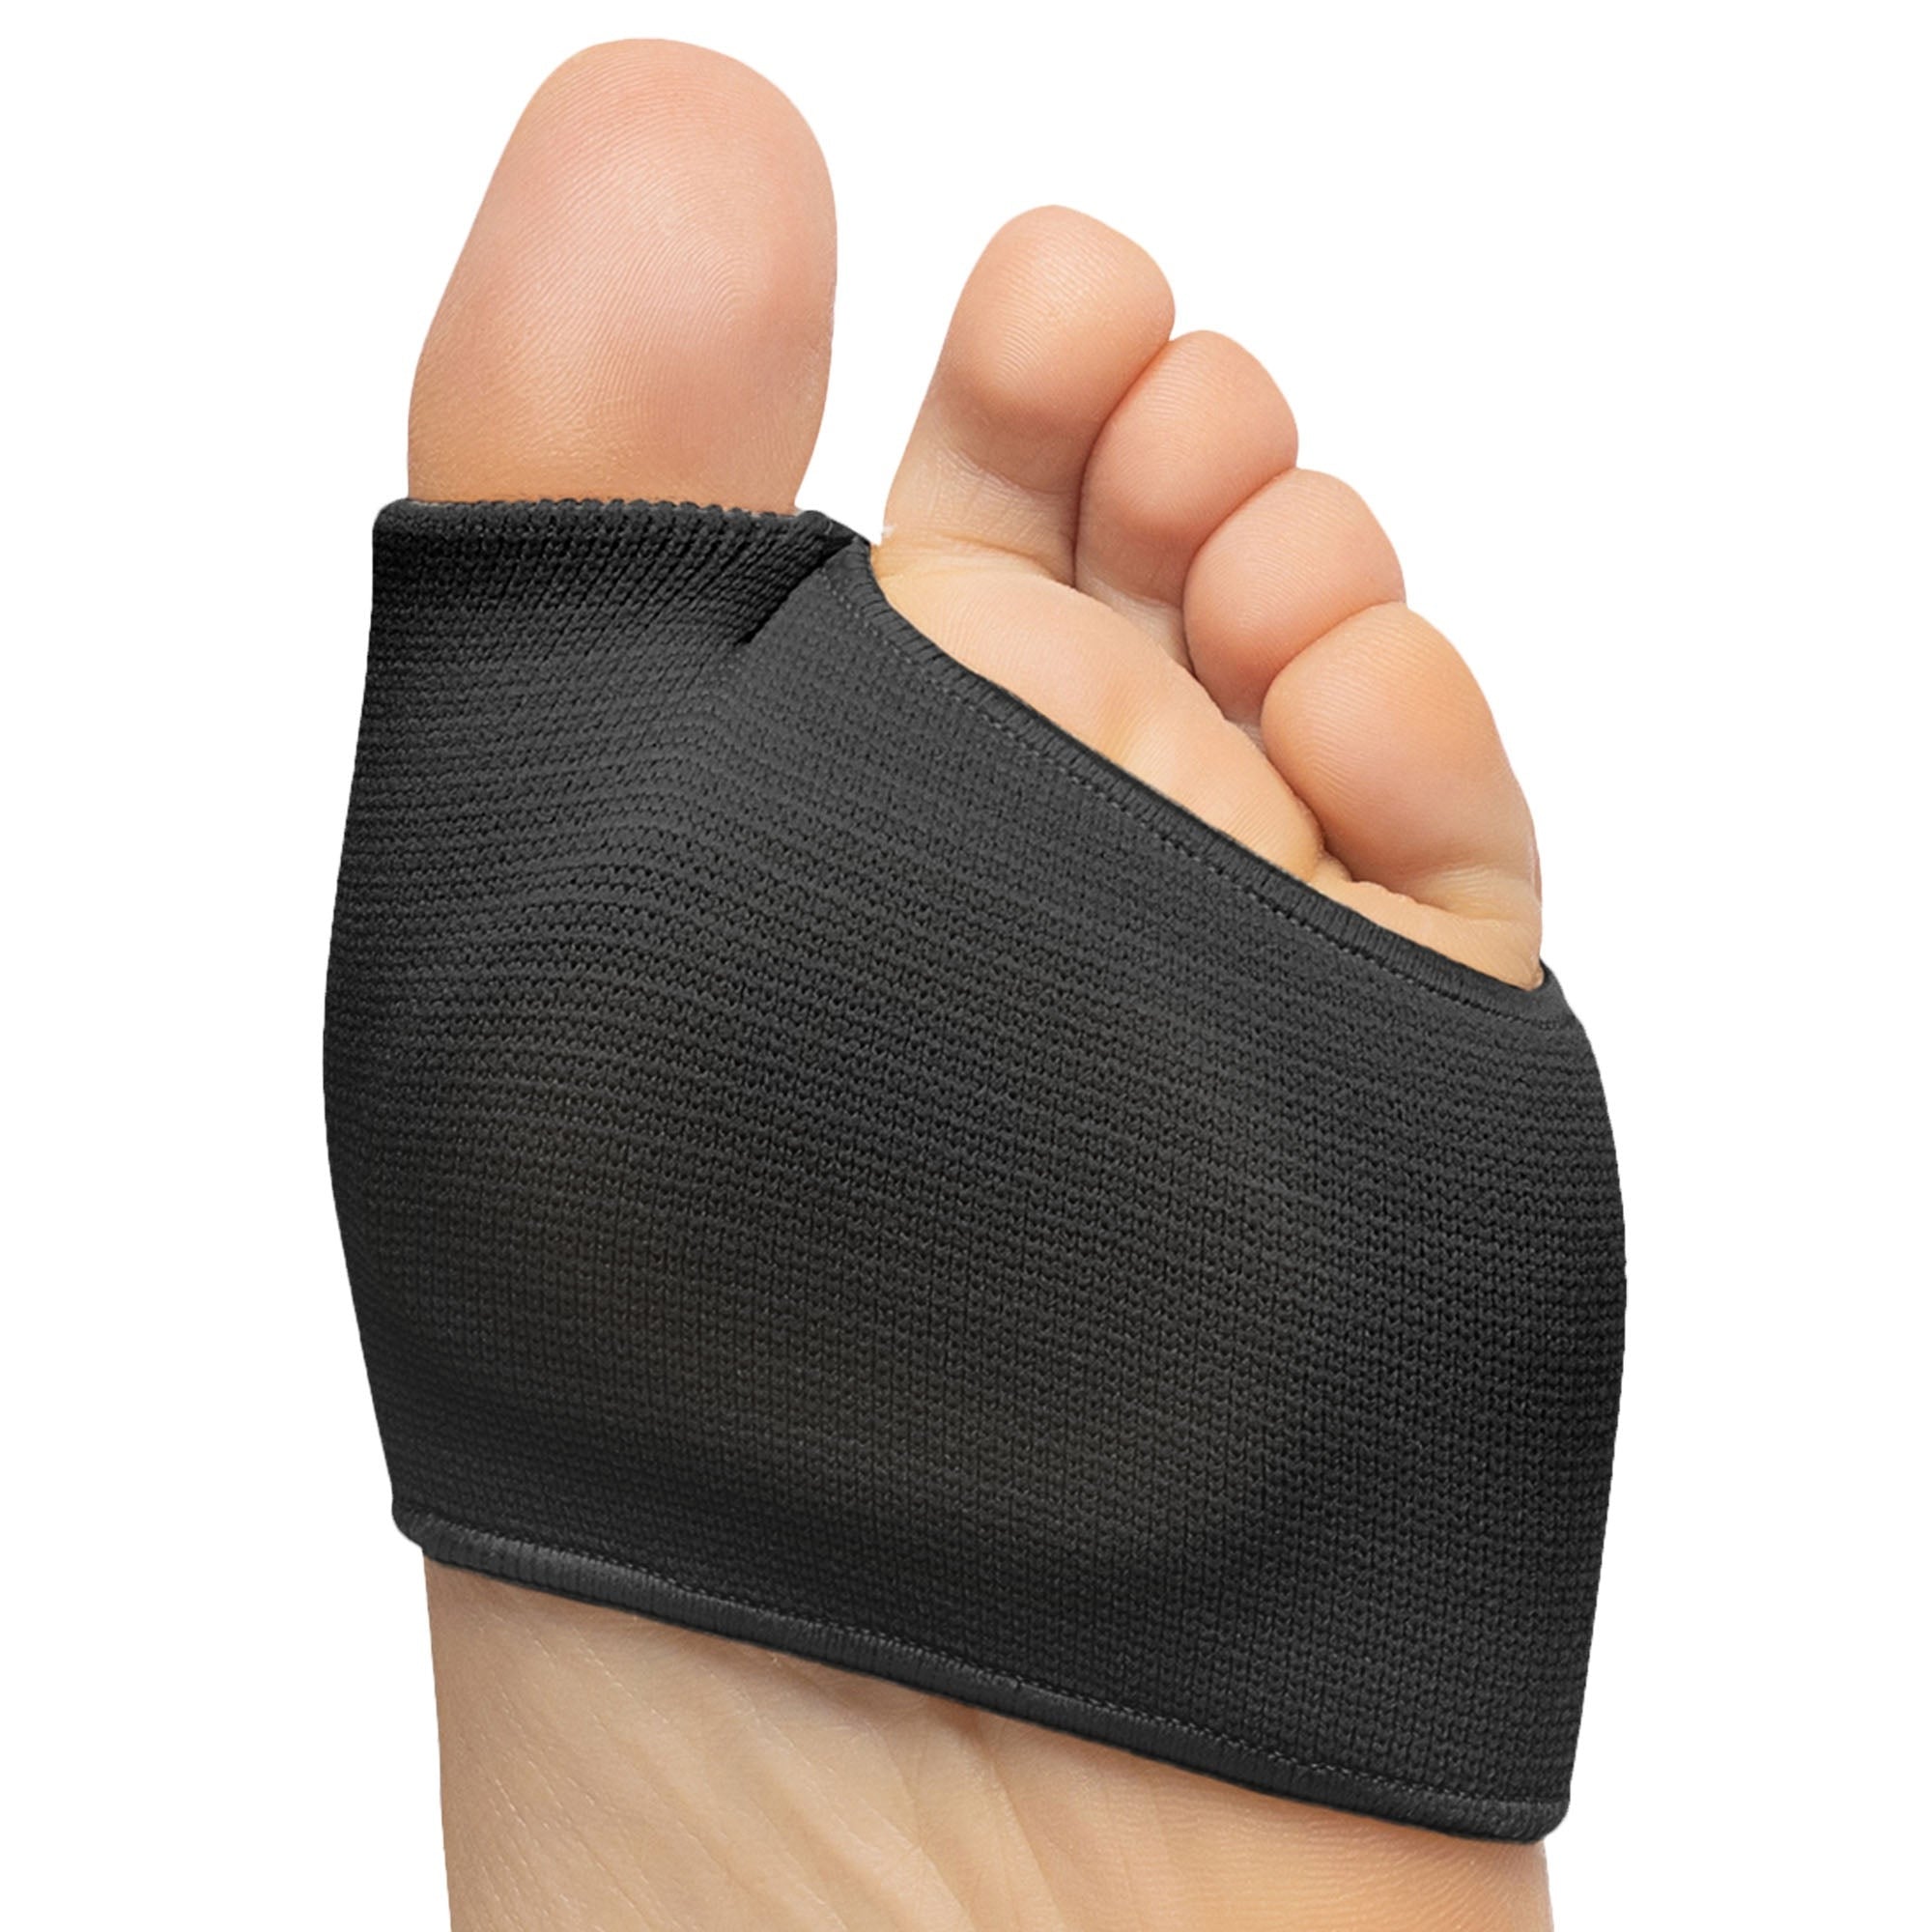 ZenToes Fabric Metatarsal Sleeve with Gel Pad Cushions Ball of Foot